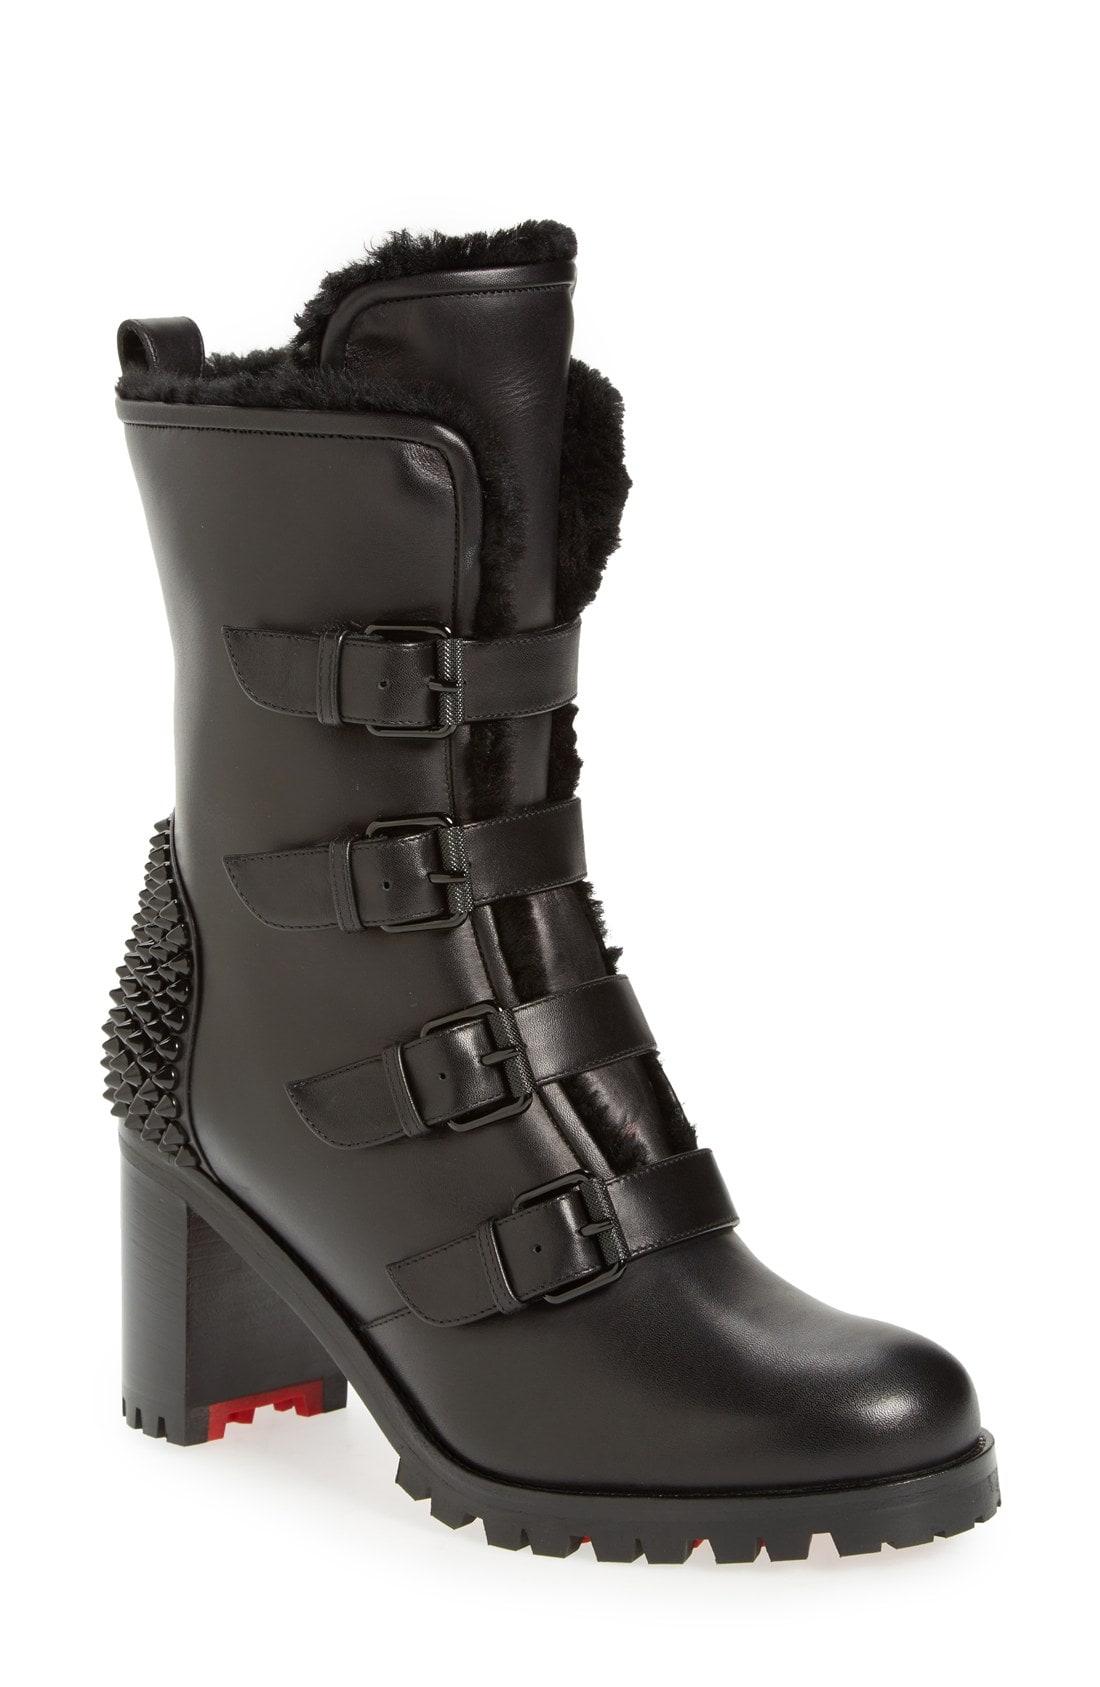 Christian Louboutin Glorymount Studded Leather Boots in Black - Lyst